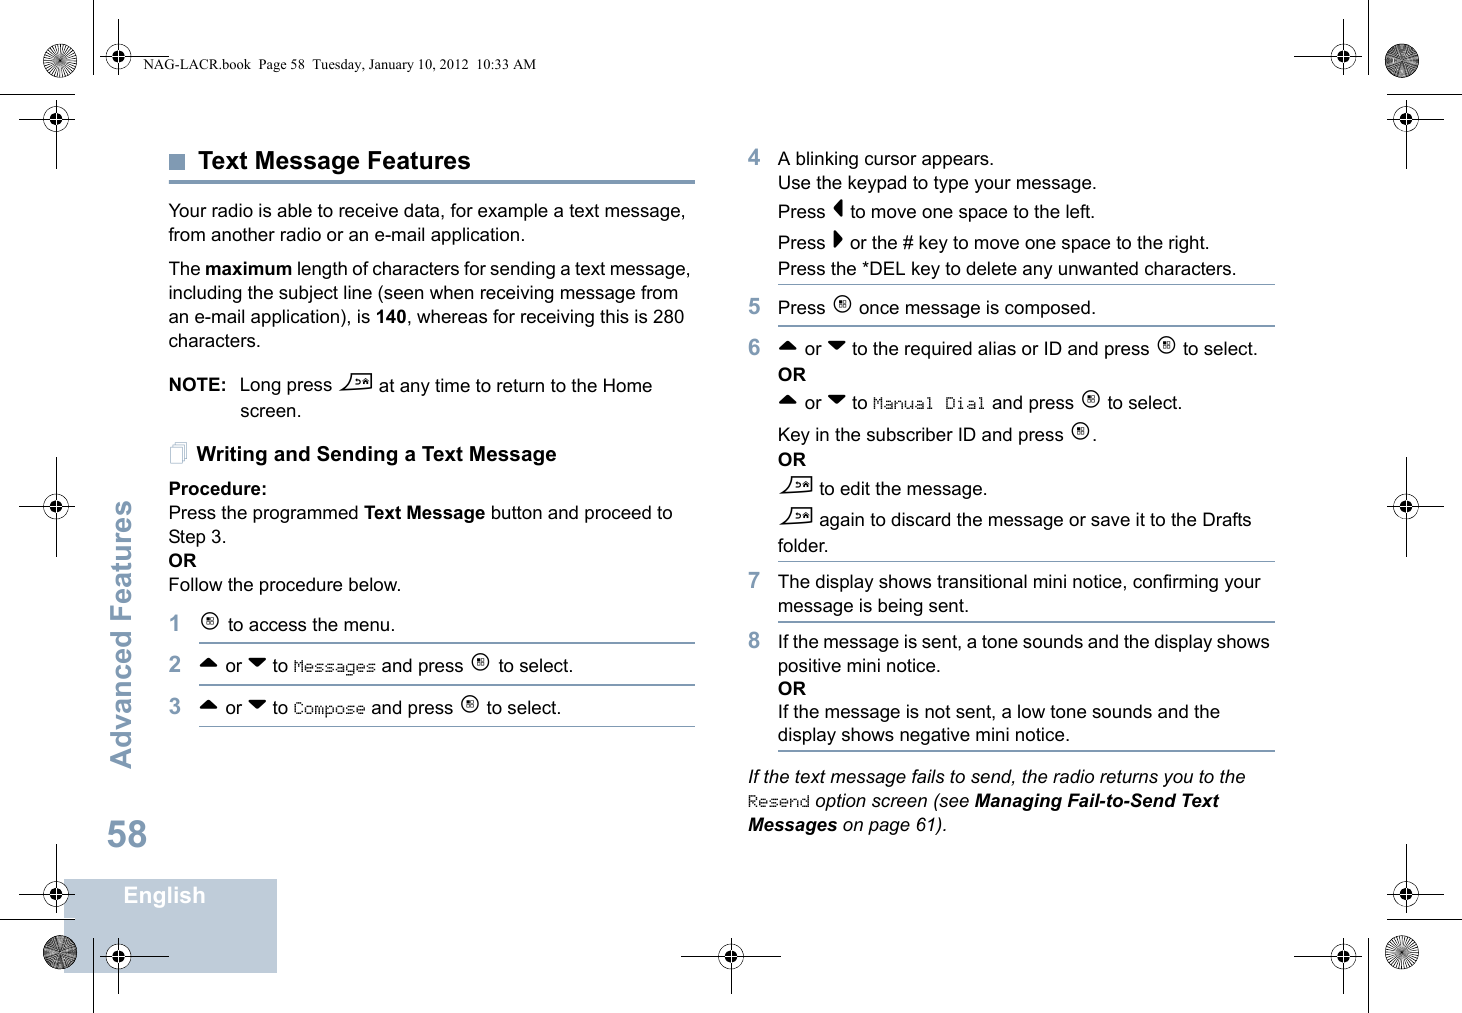 Advanced FeaturesEnglish58Text Message Features Your radio is able to receive data, for example a text message, from another radio or an e-mail application.The maximum length of characters for sending a text message, including the subject line (seen when receiving message from an e-mail application), is 140, whereas for receiving this is 280 characters.NOTE: Long press d at any time to return to the Home screen.Writing and Sending a Text MessageProcedure:Press the programmed Text Message button and proceed to Step 3.ORFollow the procedure below.1c to access the menu.2^ or v to Messages and press c to select.3^ or v to Compose and press c to select.4A blinking cursor appears. Use the keypad to type your message.Press &lt; to move one space to the left. Press &gt; or the # key to move one space to the right.Press the *DEL key to delete any unwanted characters.5Press c once message is composed.6^ or v to the required alias or ID and press c to select.OR^ or v to Manual Dial and press c to select. Key in the subscriber ID and press c.ORd to edit the message.d again to discard the message or save it to the Drafts folder.7The display shows transitional mini notice, confirming your message is being sent.8If the message is sent, a tone sounds and the display shows positive mini notice.ORIf the message is not sent, a low tone sounds and the display shows negative mini notice.If the text message fails to send, the radio returns you to the Resend option screen (see Managing Fail-to-Send Text Messages on page 61).NAG-LACR.book  Page 58  Tuesday, January 10, 2012  10:33 AM